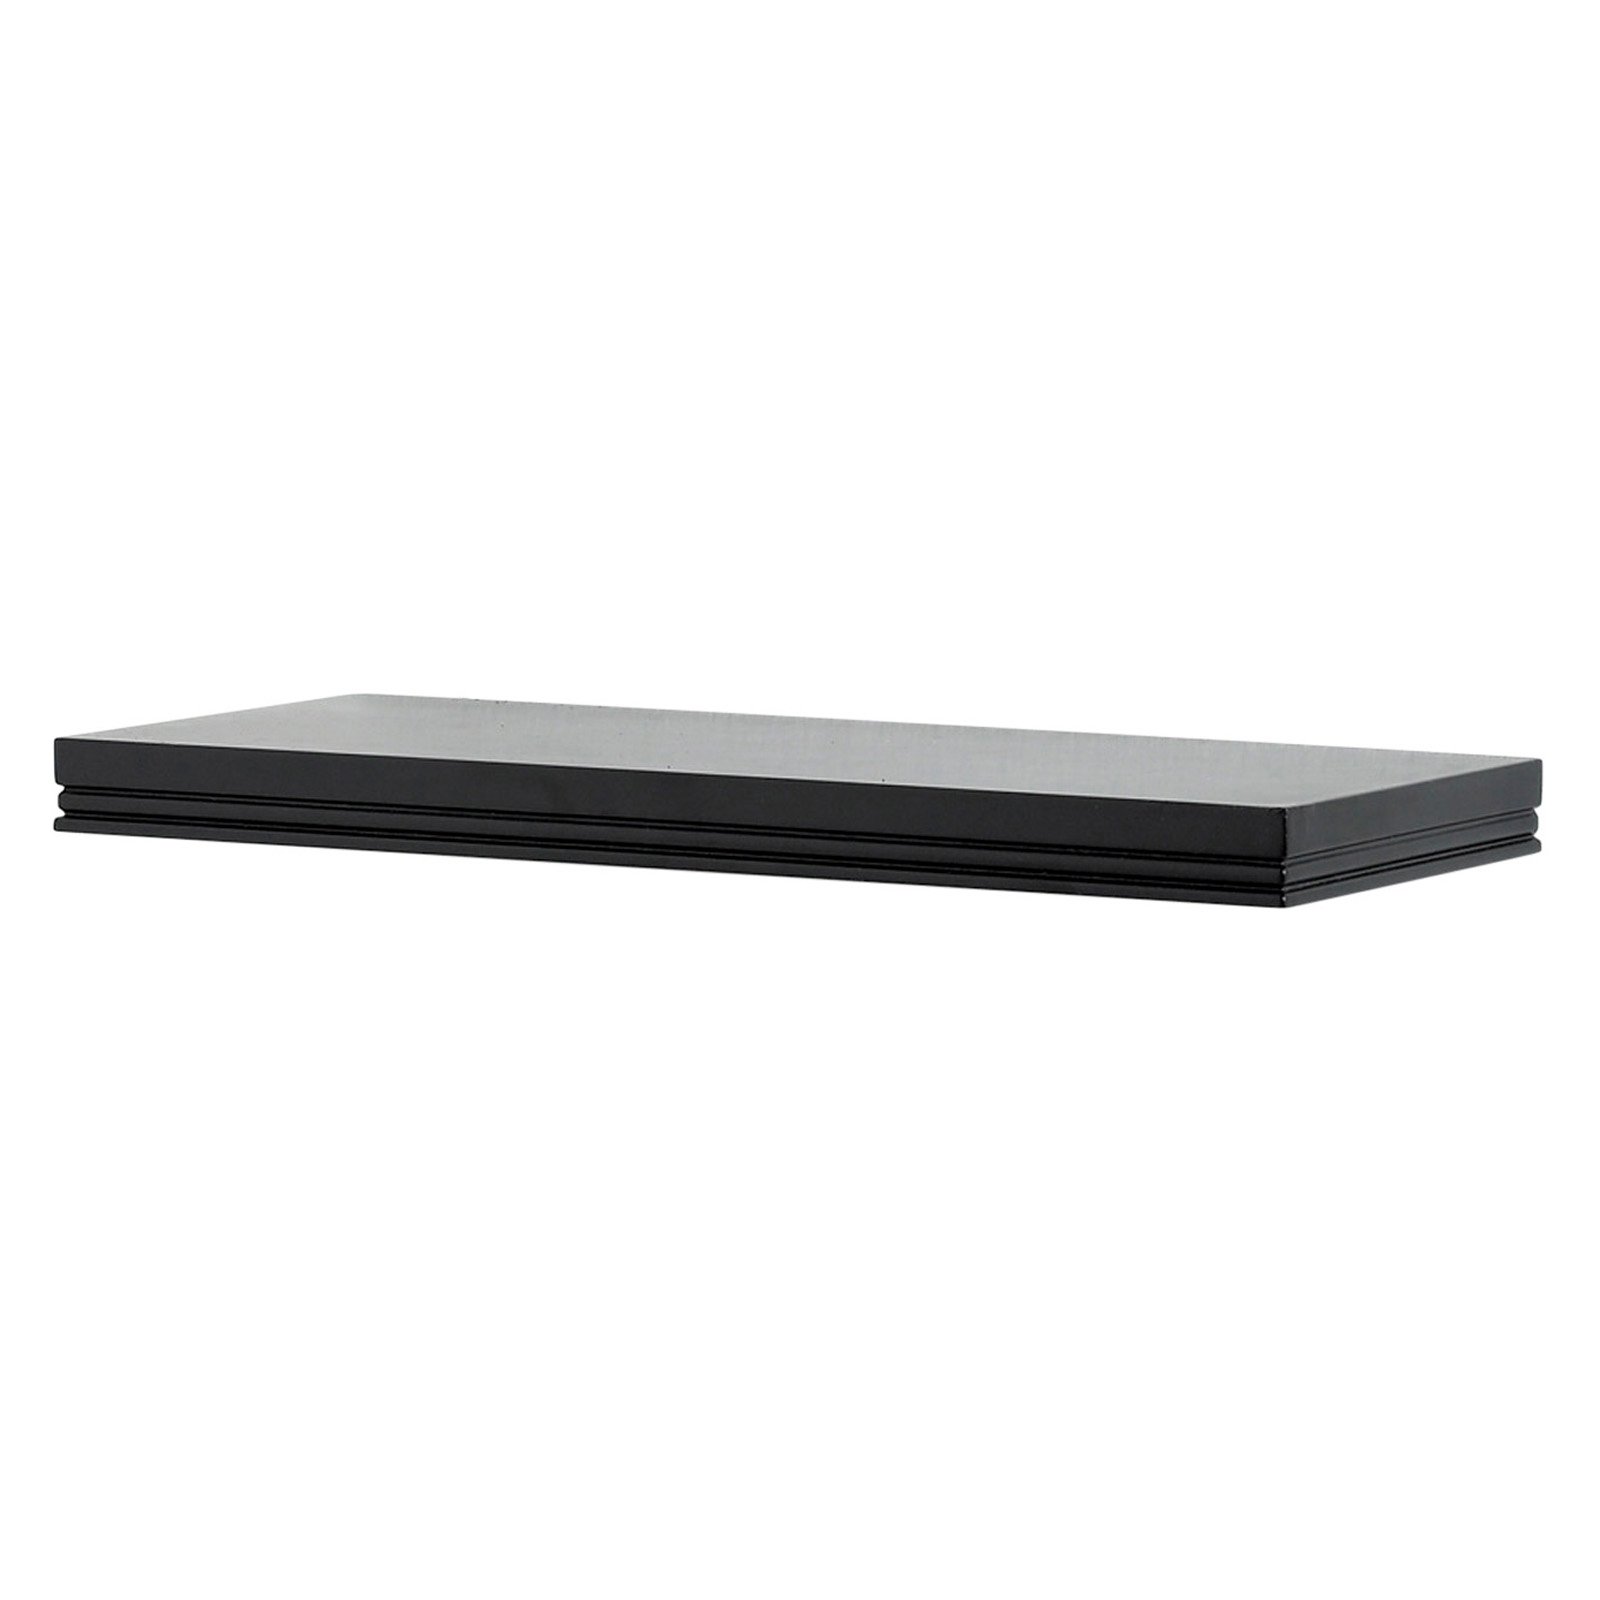 Warwick 10 in W x 8 in D x 1.25 in H Floating Wall Shelves, Set of 2, Black - image 2 of 4